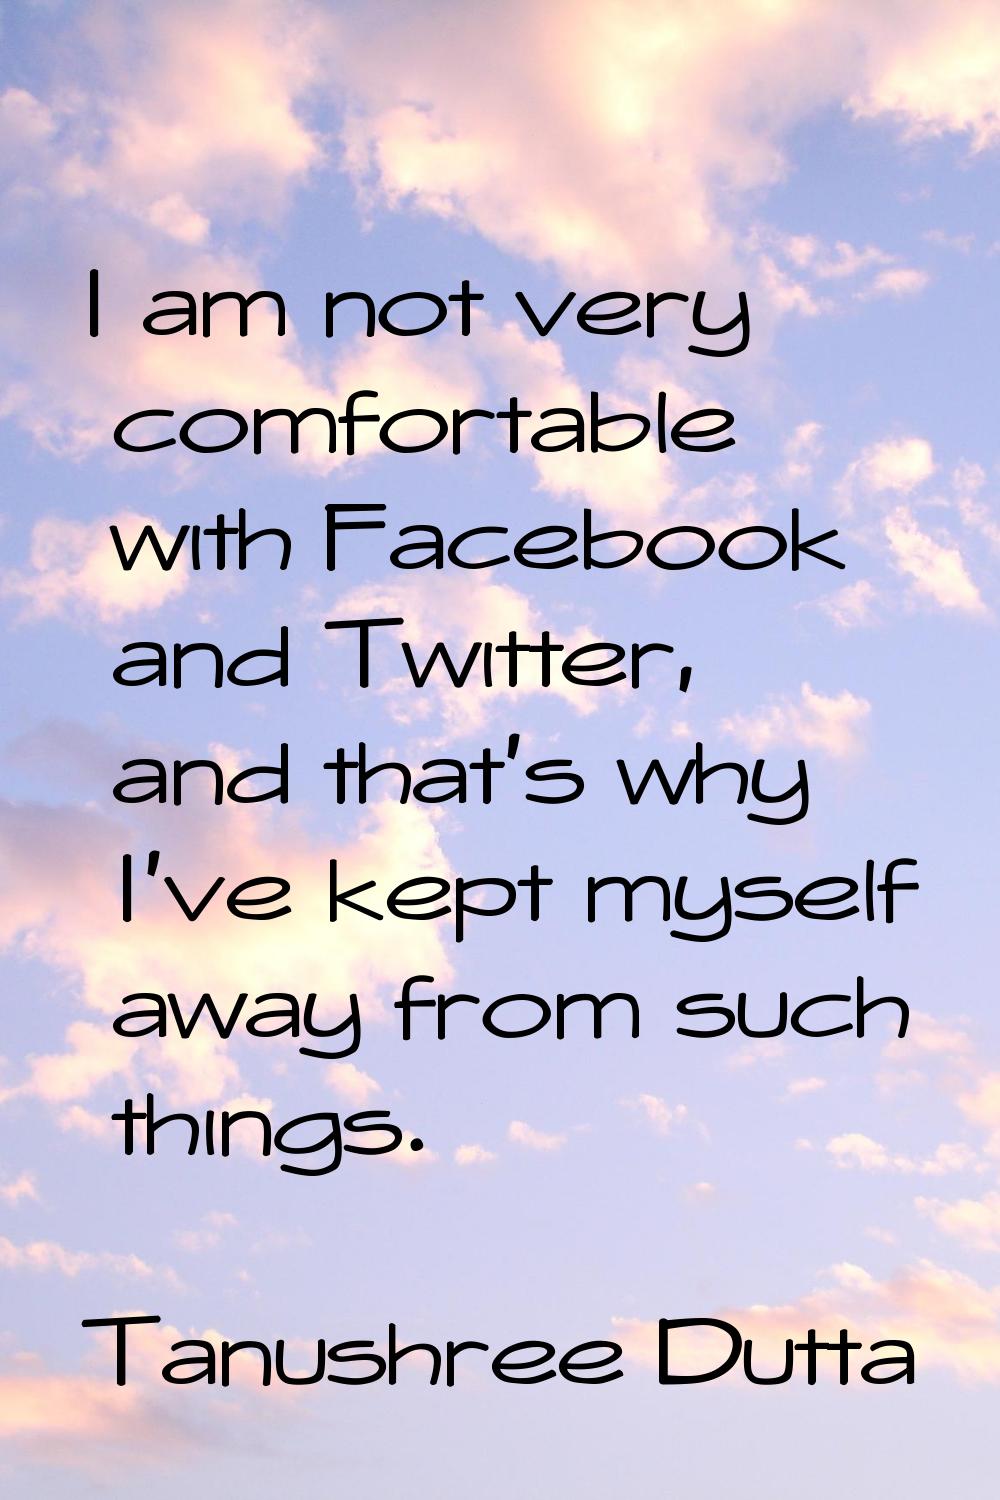 I am not very comfortable with Facebook and Twitter, and that's why I've kept myself away from such